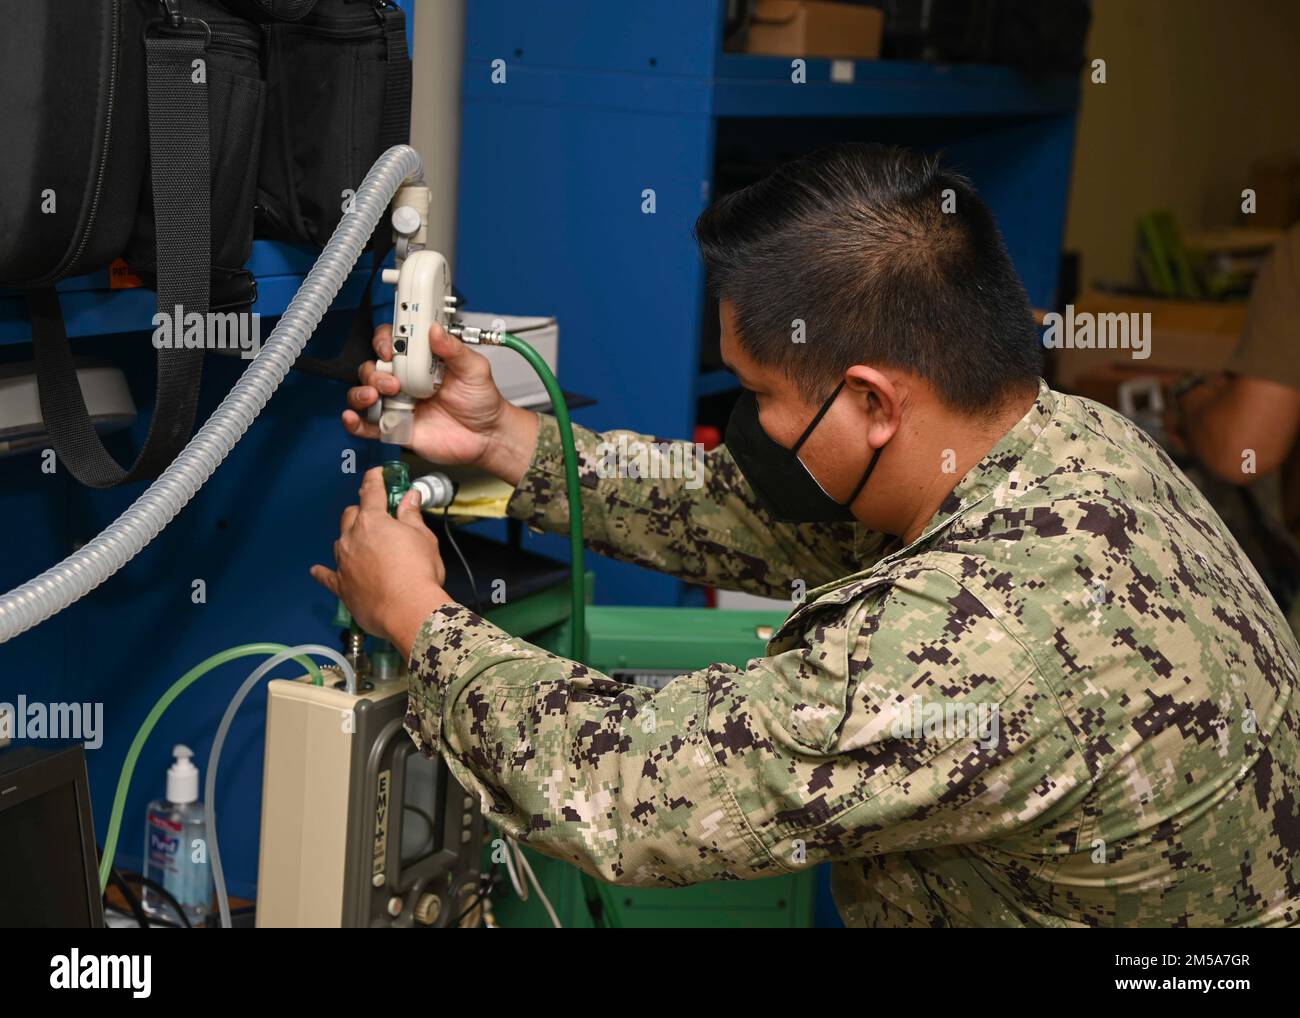 220215-N-UJ449-1011 NAVAL AIR STATION SIGONELLA, Italy (Feb. 15, 2022)— Hospital Corpsman 1st Class Victoriano Rosales, from San Diego, assigned to U.S. Navy Medicine and Readiness Training Command Sigonella, performs maintenance on a portable ventilator on Naval Air Station Sigonella, Feb. 15, 2022. NAS Sigonella’s strategic location enables U.S., allied, and partner nation forces to deploy and respond as required, ensuring security and stability in Europe, Africa and Central Command. Stock Photo